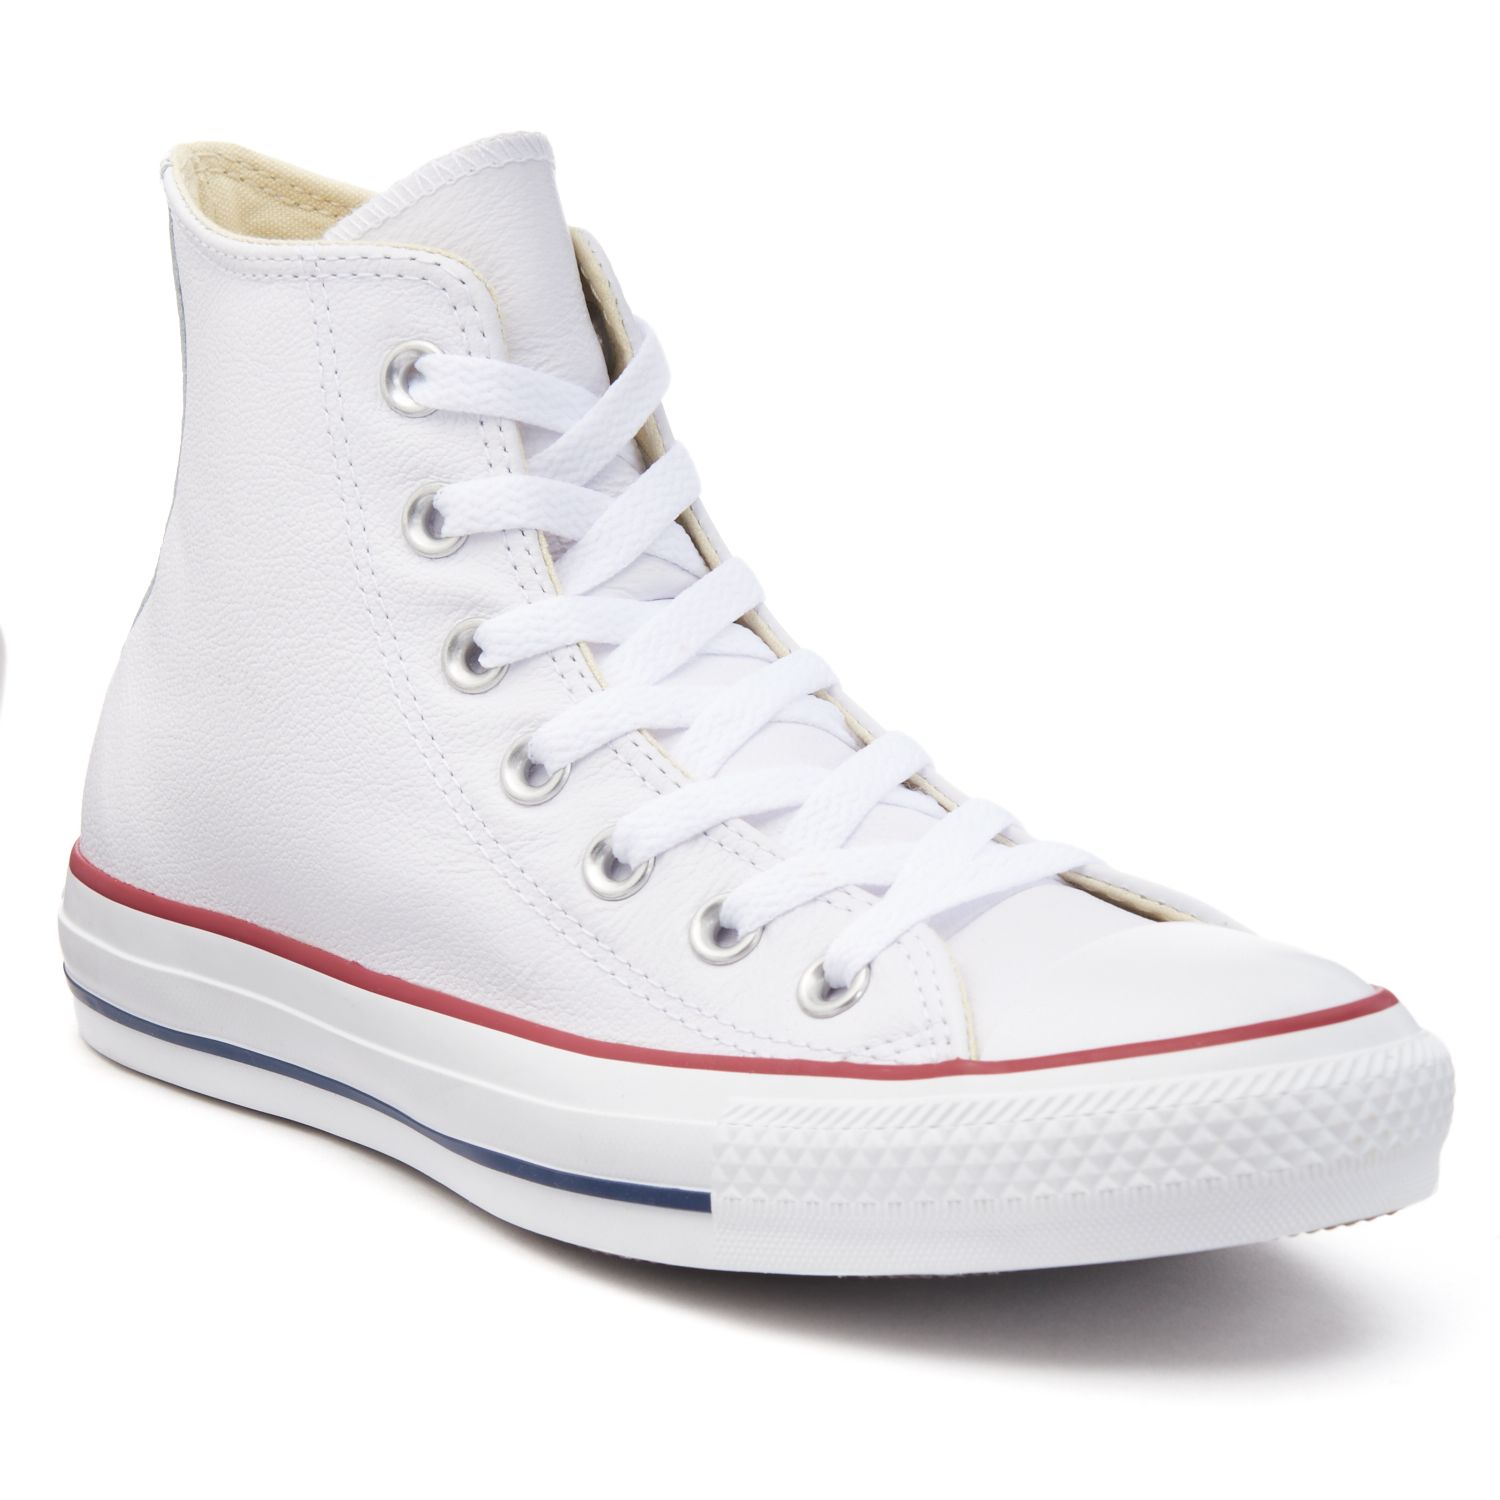 converse chuck taylor all star leather hi